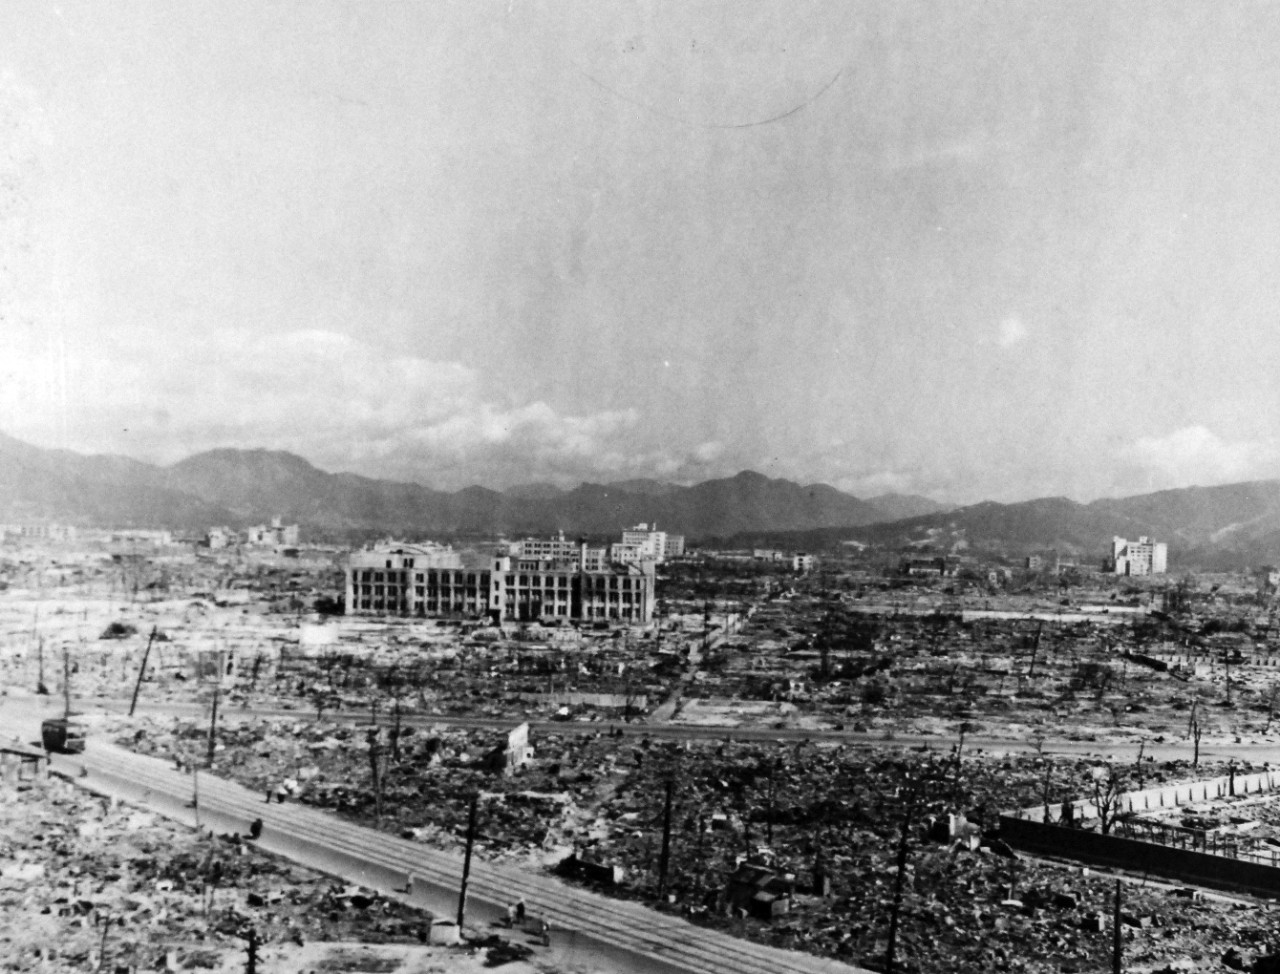 80-G-373264:  Hiroshima, Japan, 1945.   Atomic Bomb damage to Hiroshima, Japan.  Photograph released, October 14, 1945.  U.S. Navy Photograph, now in the collections of the National Archives. (2015/12/08).